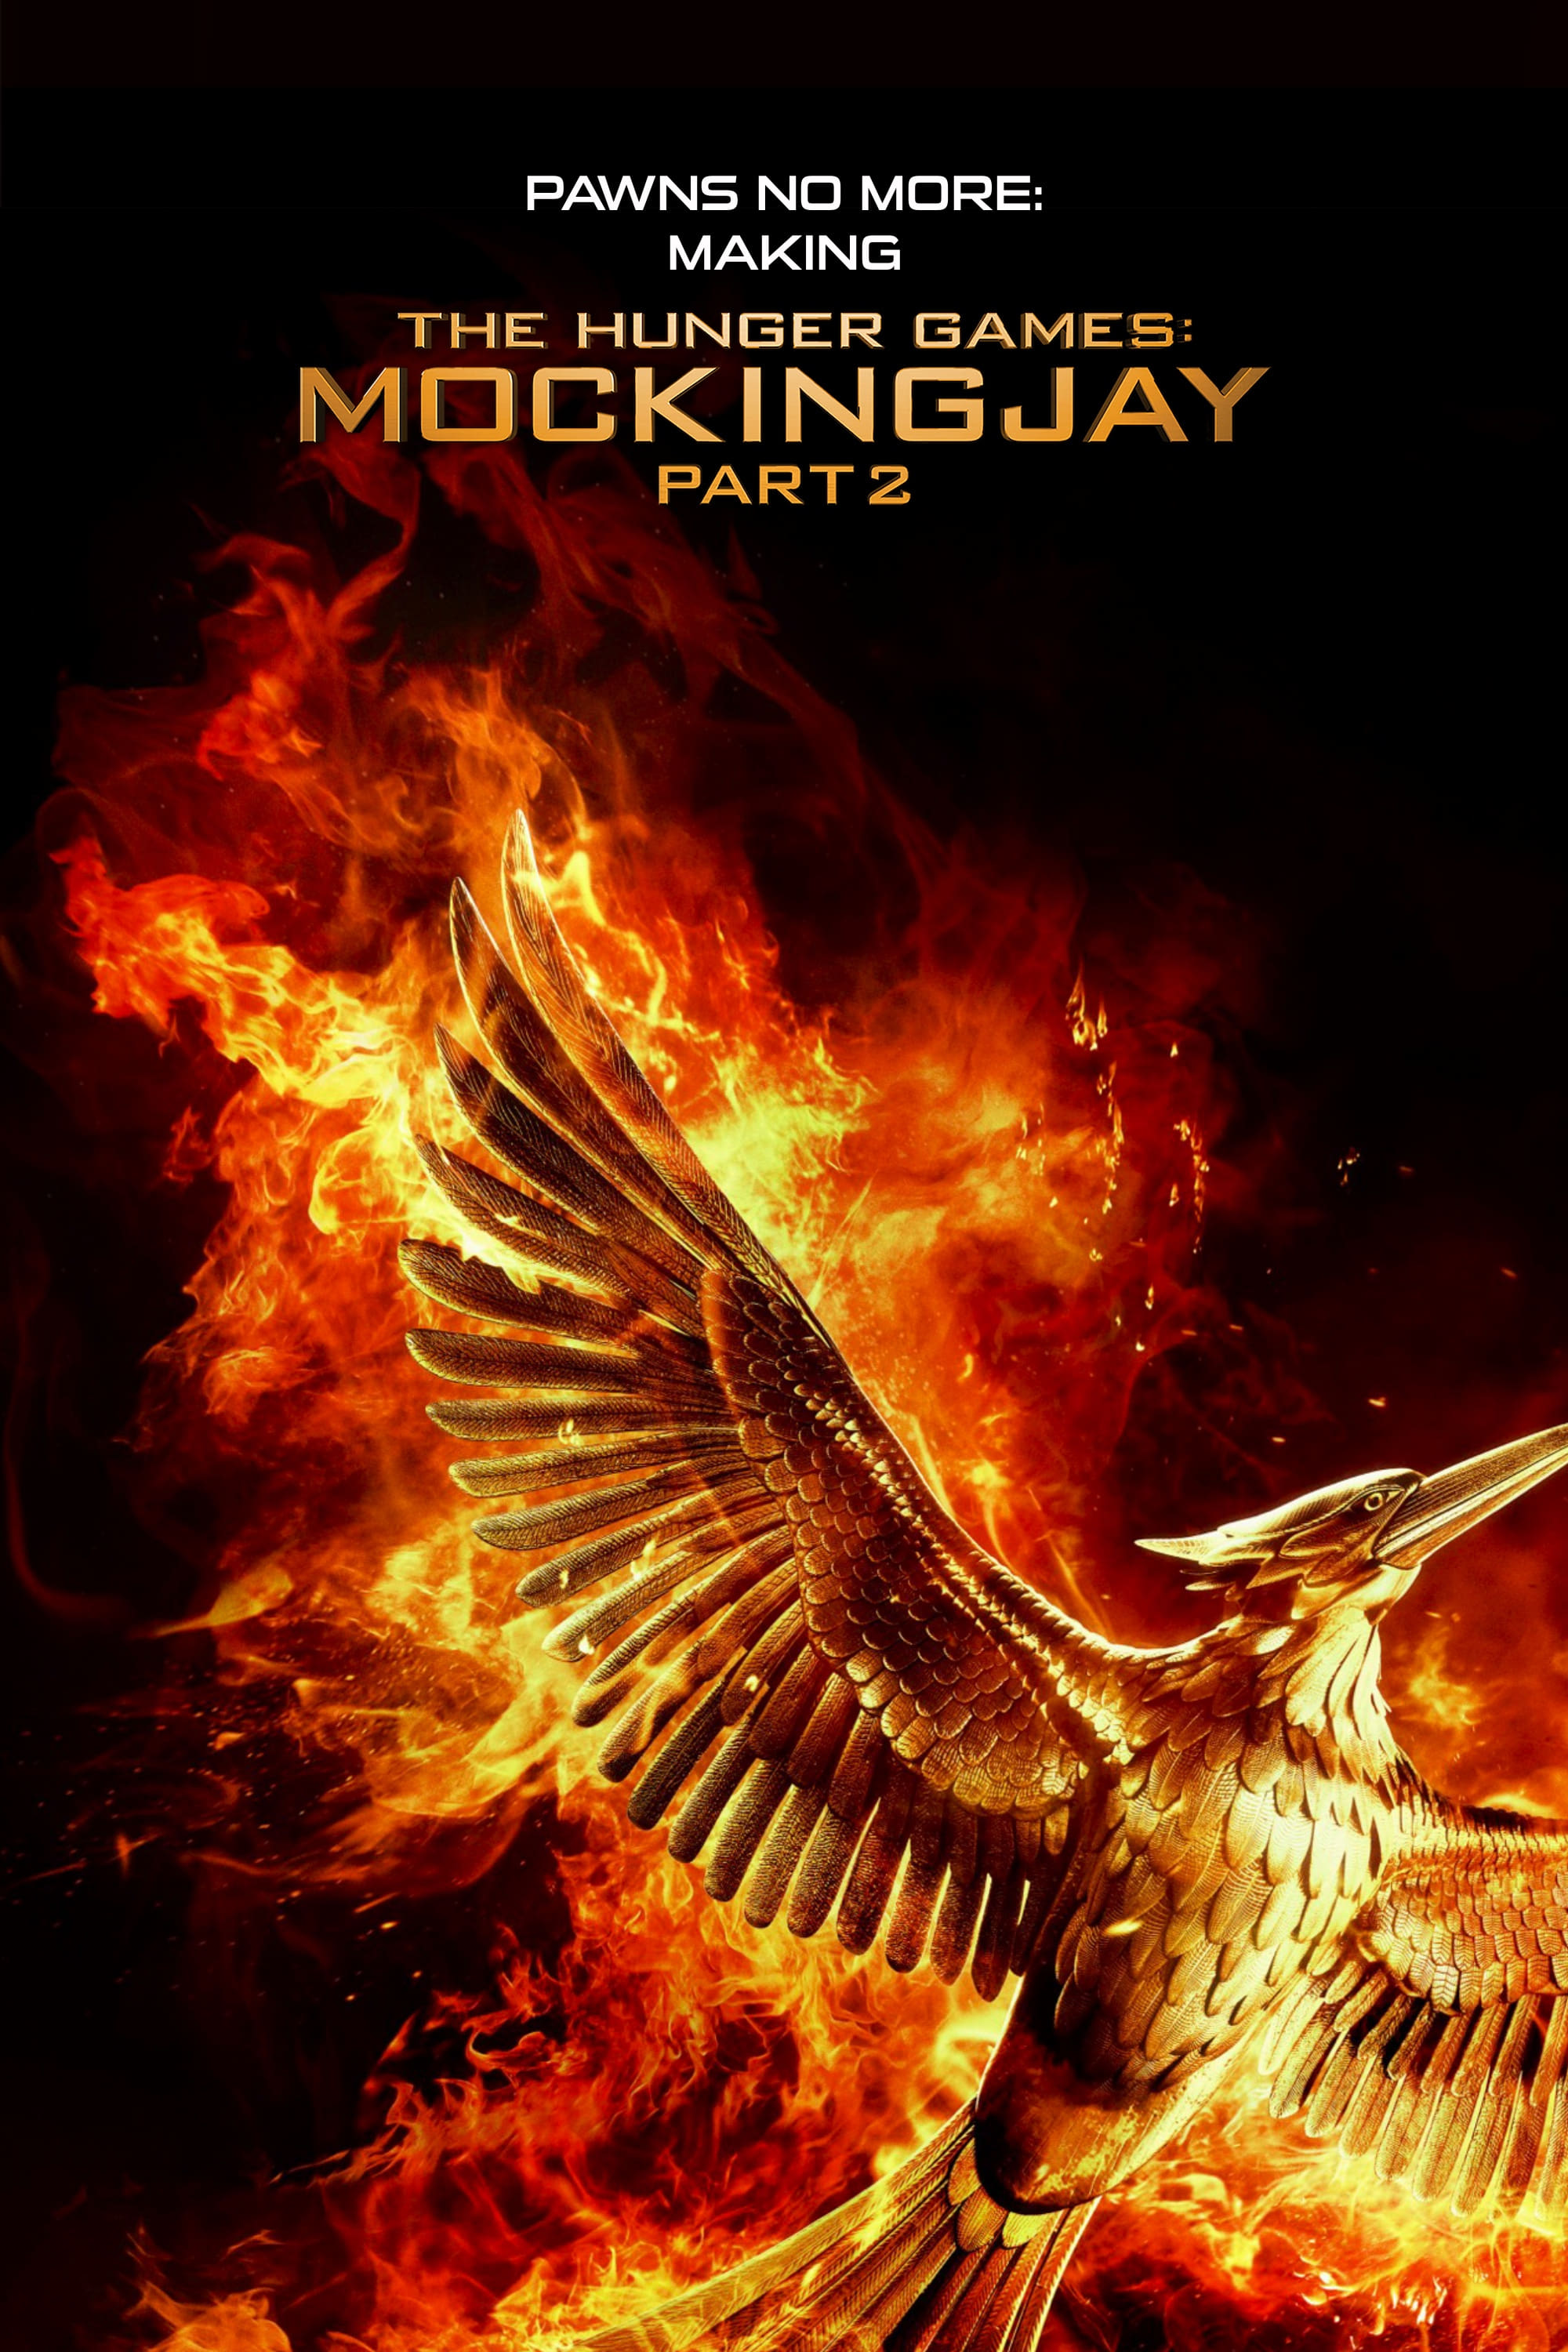 Pawns No More: The Making of The Hunger Games: Mockingjay Part 2